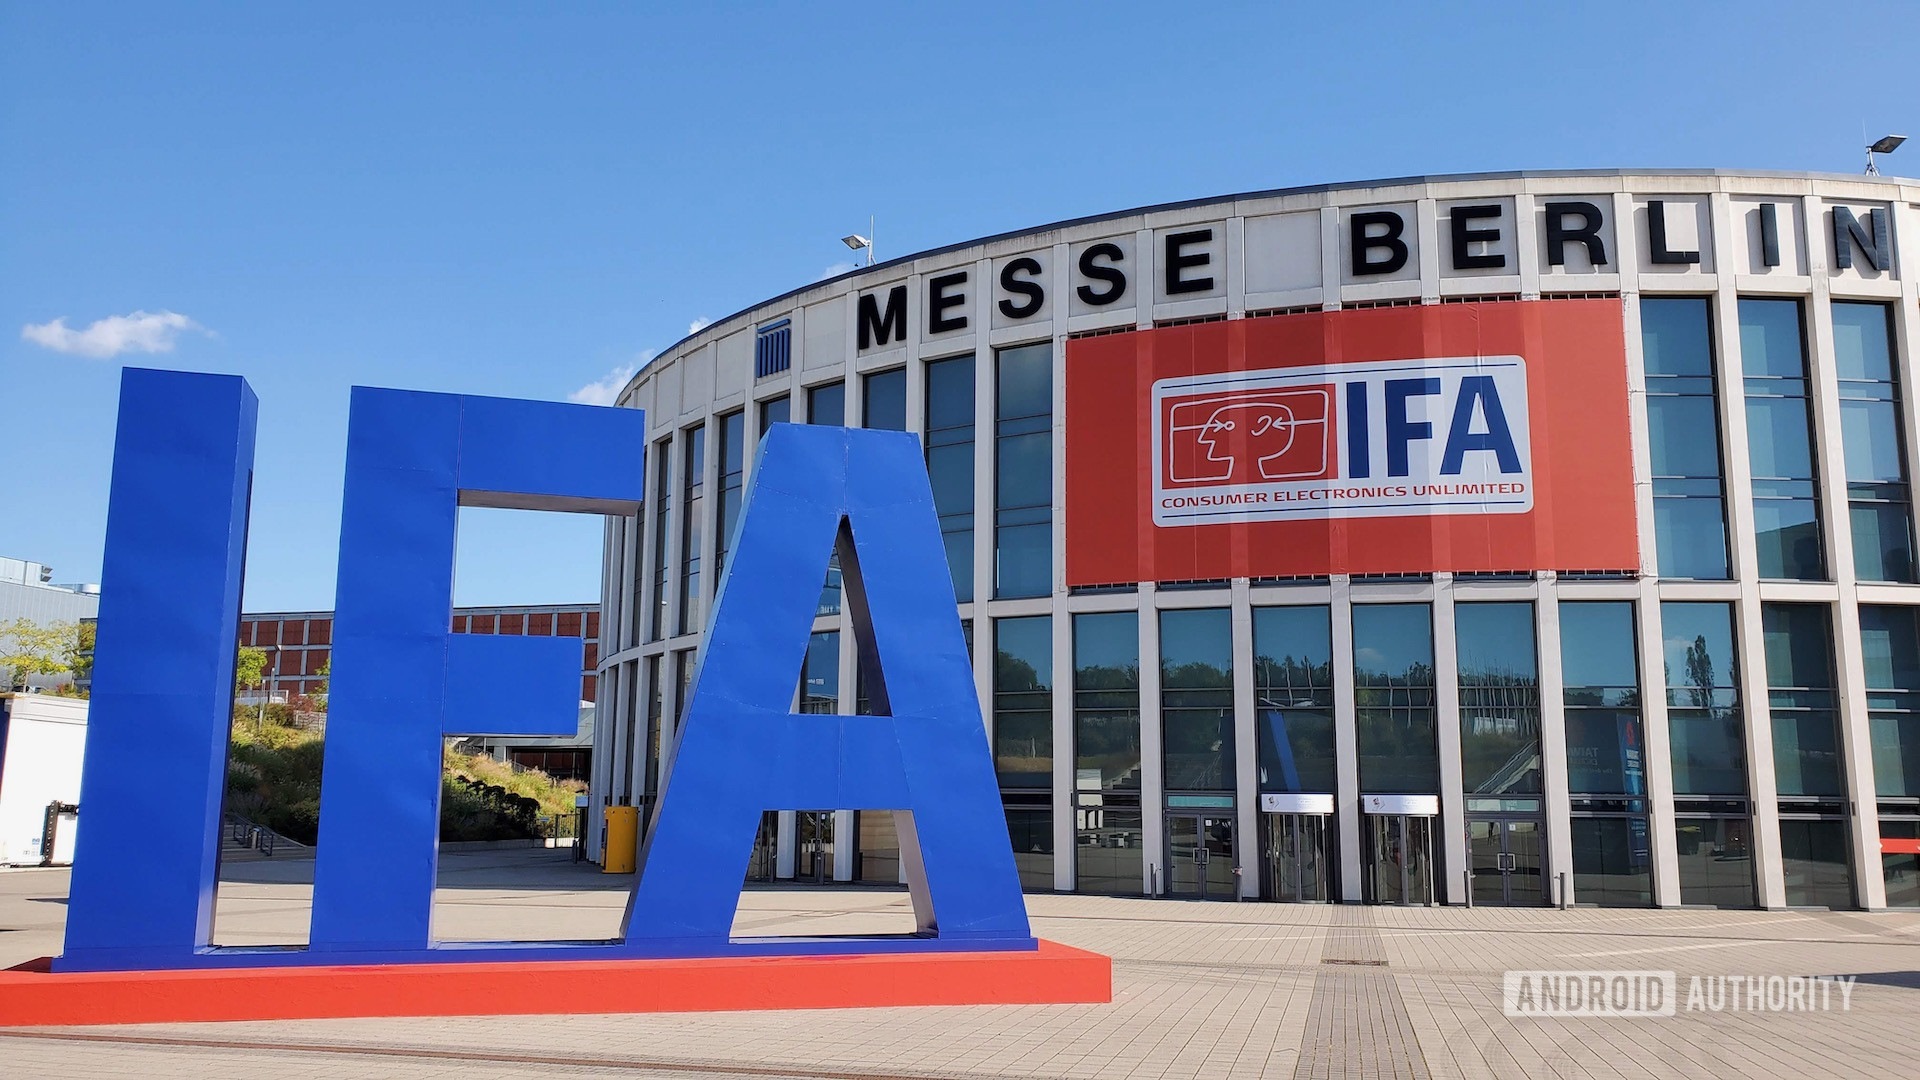 IFA logo and Messe